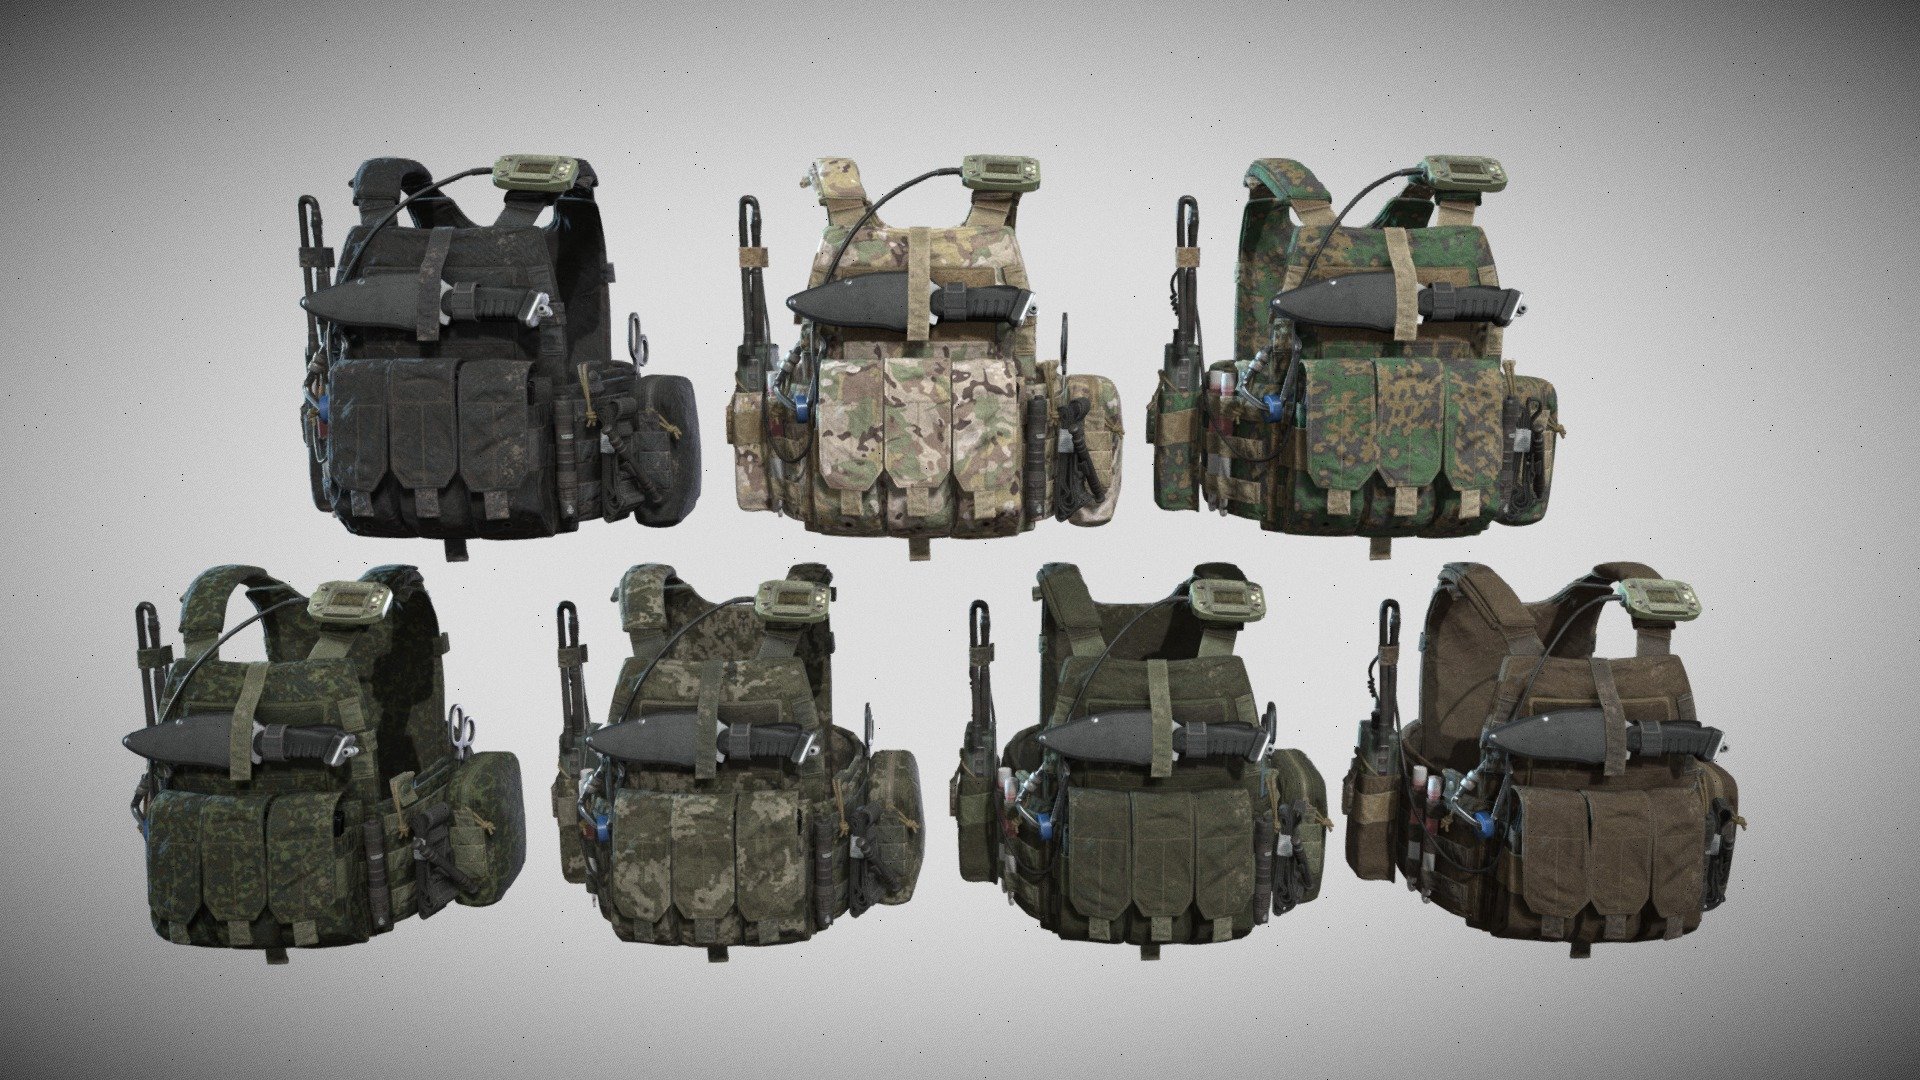 Game-Ready PBR low-poly model of a tactical vest.
All materials and textures are included.
The textures of the model are applied with UV Unwrap.
Normal map was baked from a high poly model.
Including 3dsmax and Blender, OBJ and FBX.

14843 polygons
27238 triangles
14074 vertices

Maps:

vestBaseColorSand.tga, vestBaseColorBlack.tga, vestBaseColorCamo01.tga, vestBaseColorCamo02.tga, vestBaseColorCamo03.tga, vestBaseColorCamo04.tga, vestBaseColorGreen.tga, vestNormal.tga, vestSpecular.tga, vestMetallic.tga, vestAO.tga, vestCurvature.tga, vestGlossiness.tga, vestRoughness.tga (4096x4096)

detailsAO.tga, detailsBaseColor.tga, detailsCulvature.tga, details Diffuse.tga, detailsGlossiness.tga, detailsMetallic.tga, detailsNormal.tga, detailsSpecular.tga, detailsRoughness.tga (4096x4096)* - Tactical Vest - Buy Royalty Free 3D model by alpenwolf (@alpen) 3d model